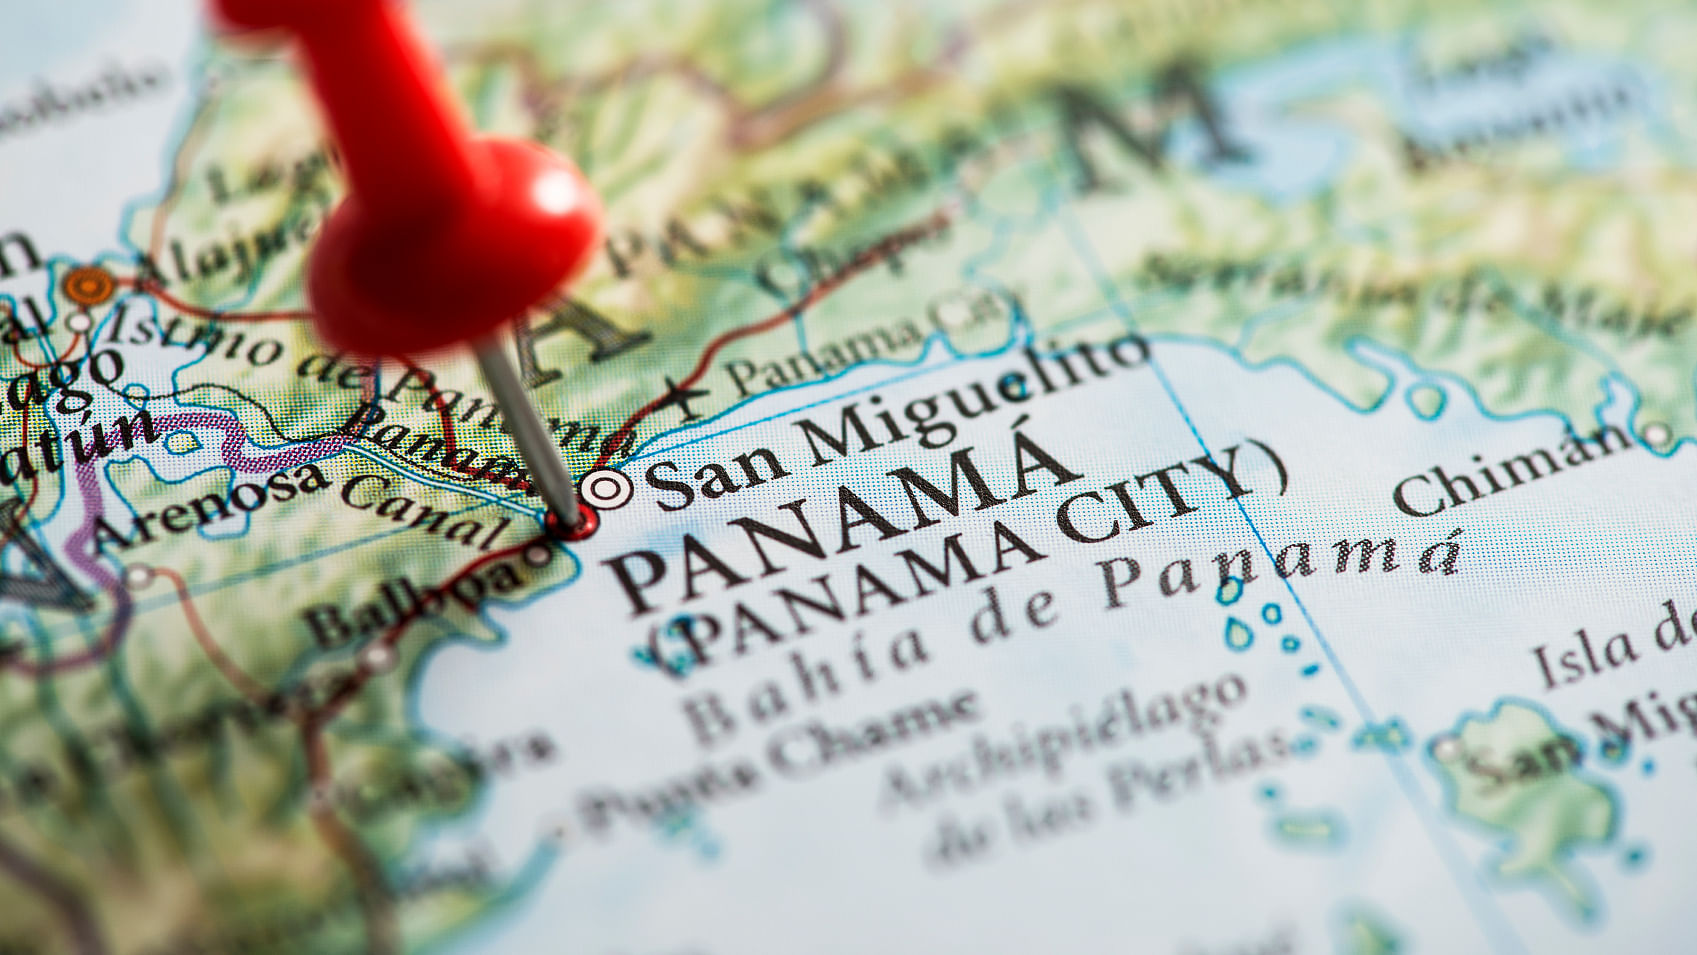 There’s a lot more to Panama than the Panama Papers Leak (Photo: iStockphoto)